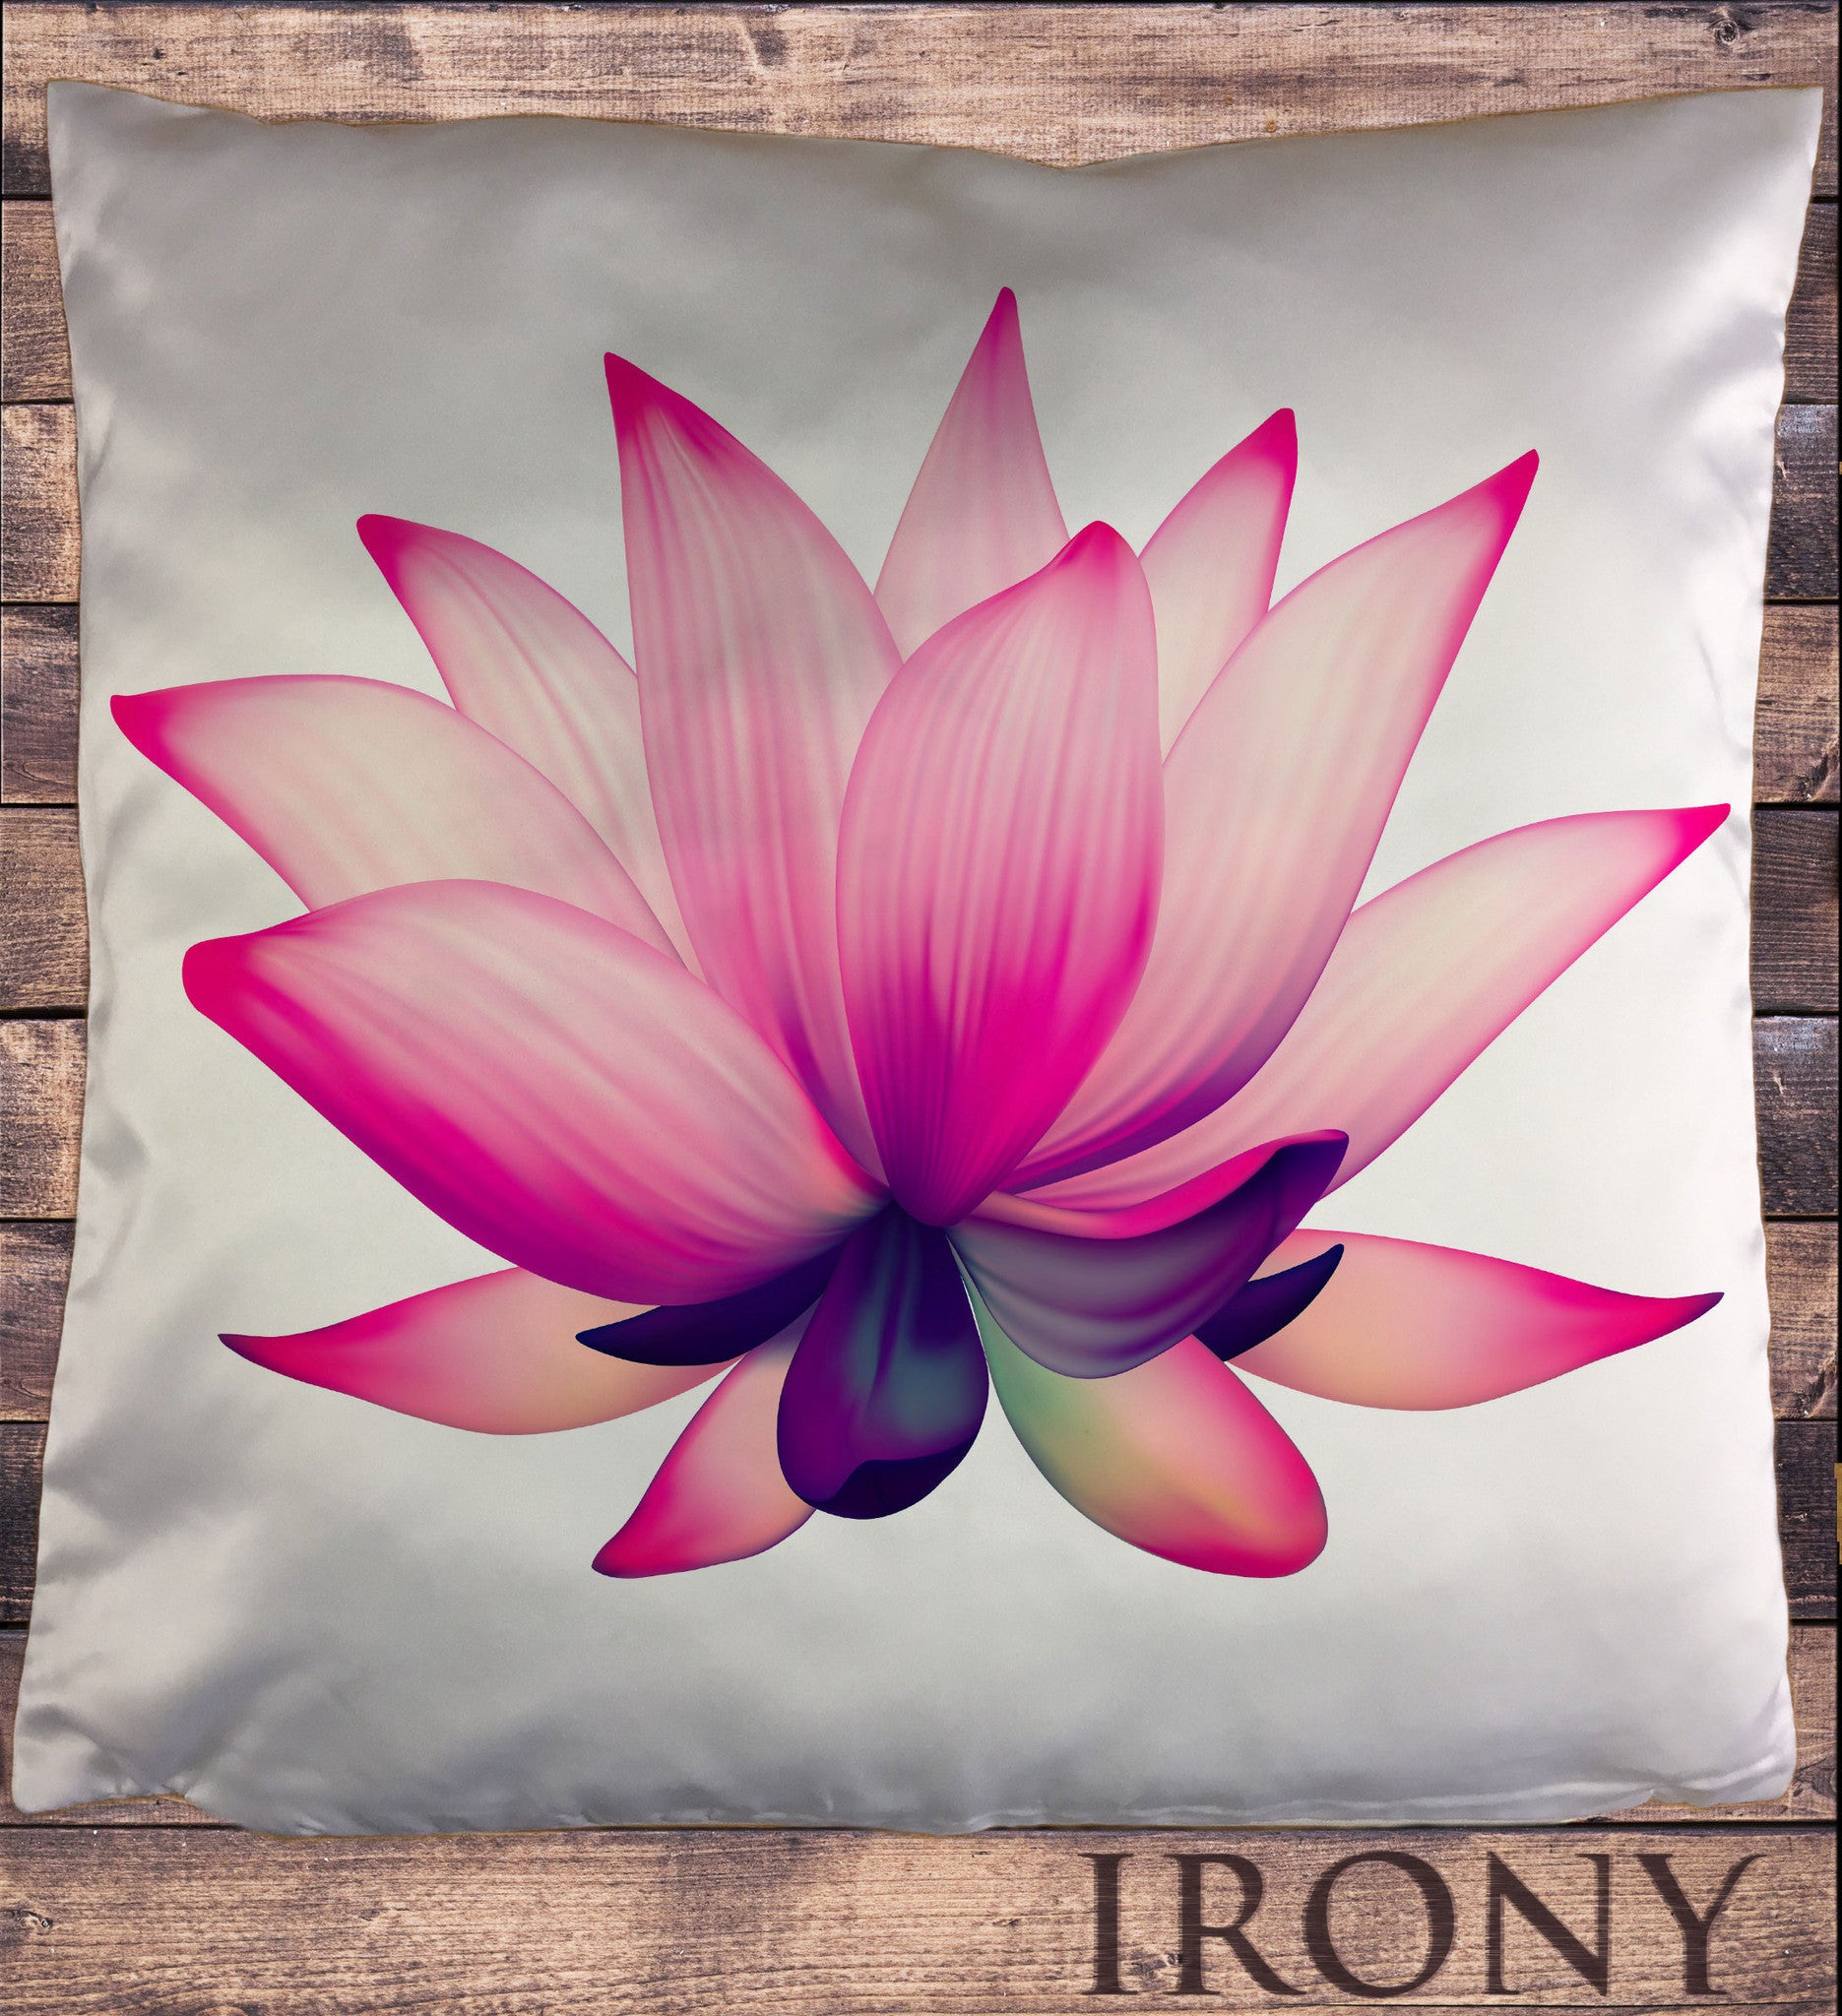 Coussin de méditation Âme en paix as comfortable as your favorite brand,  crafted sustainably and ethically with eco-friendly materials. – Rose Buddha